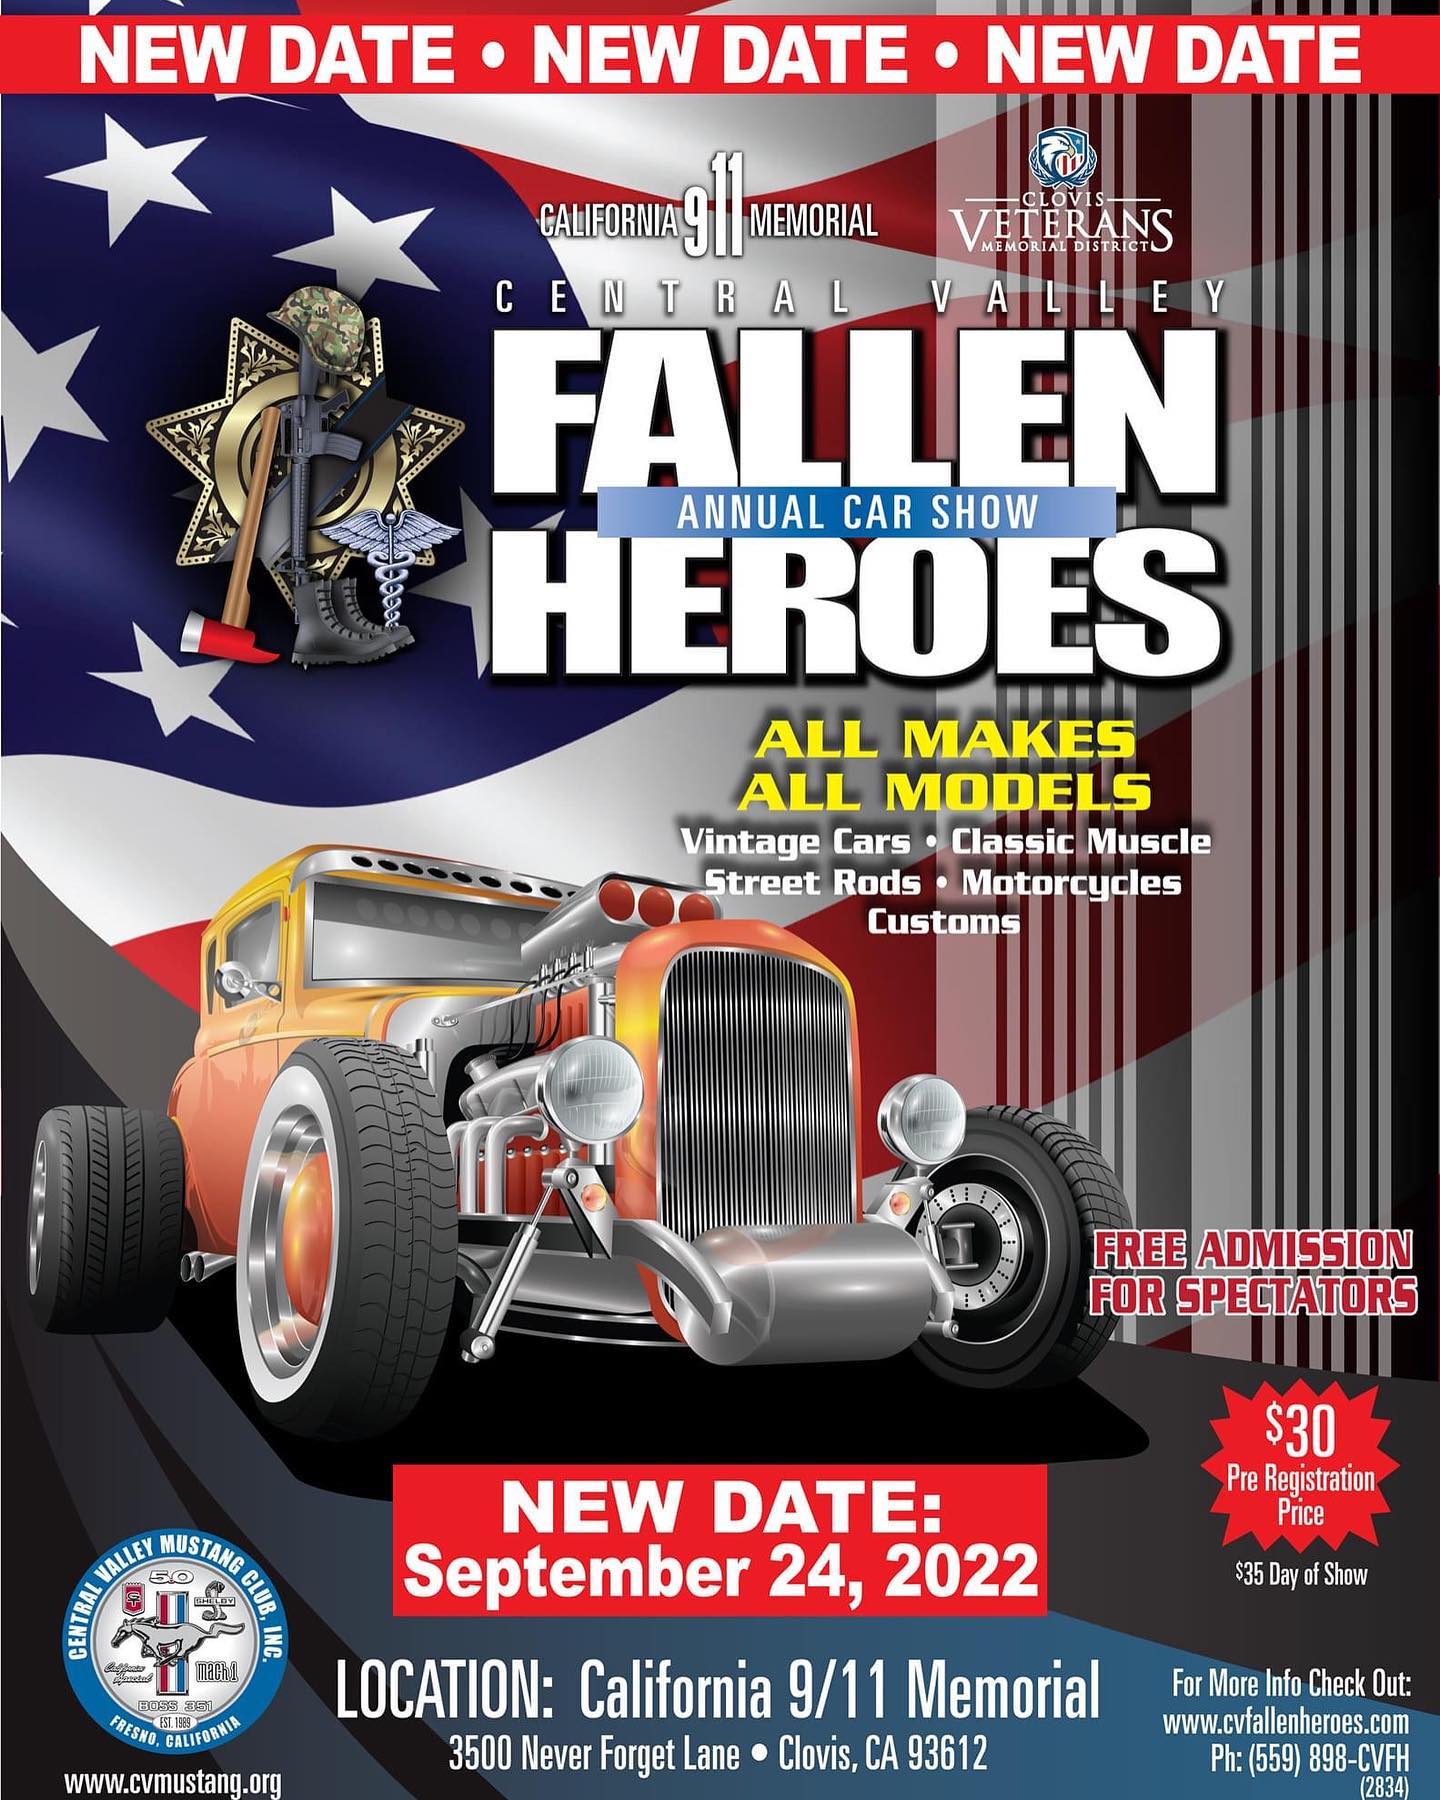 Central Valley Fallen Heroes Car Show